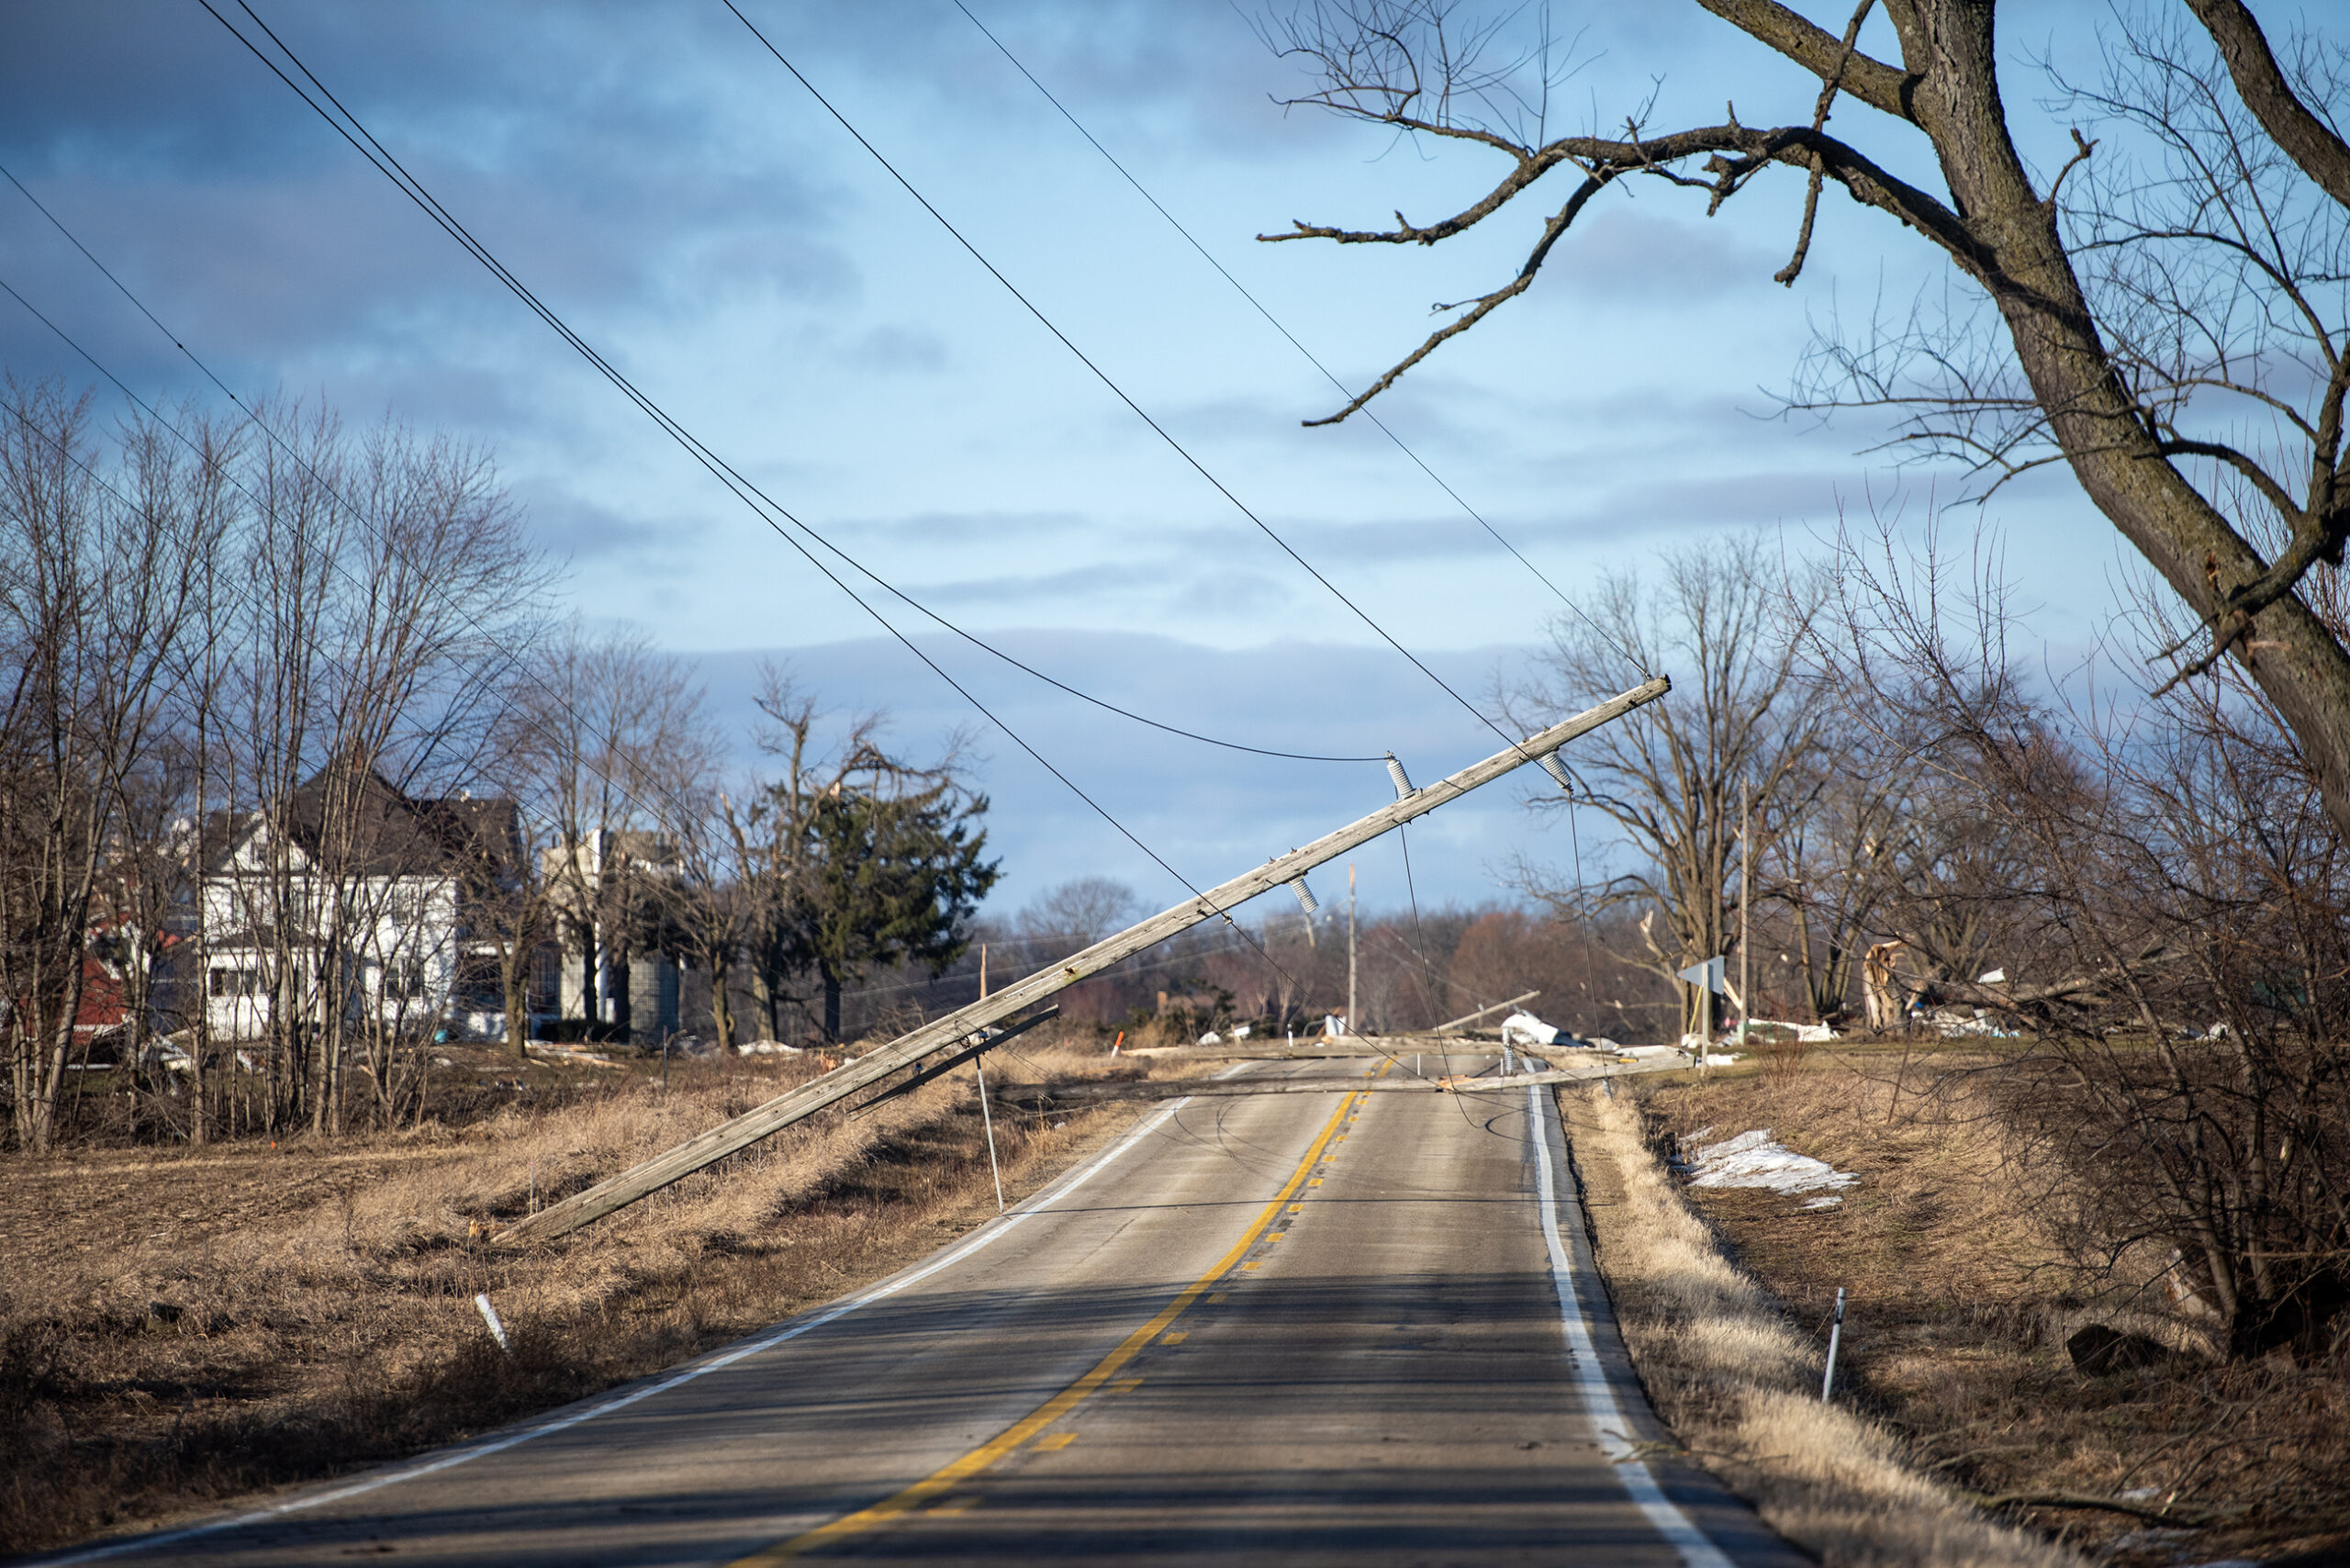 A pole with power lines hangs over the road after a storm went through the area.